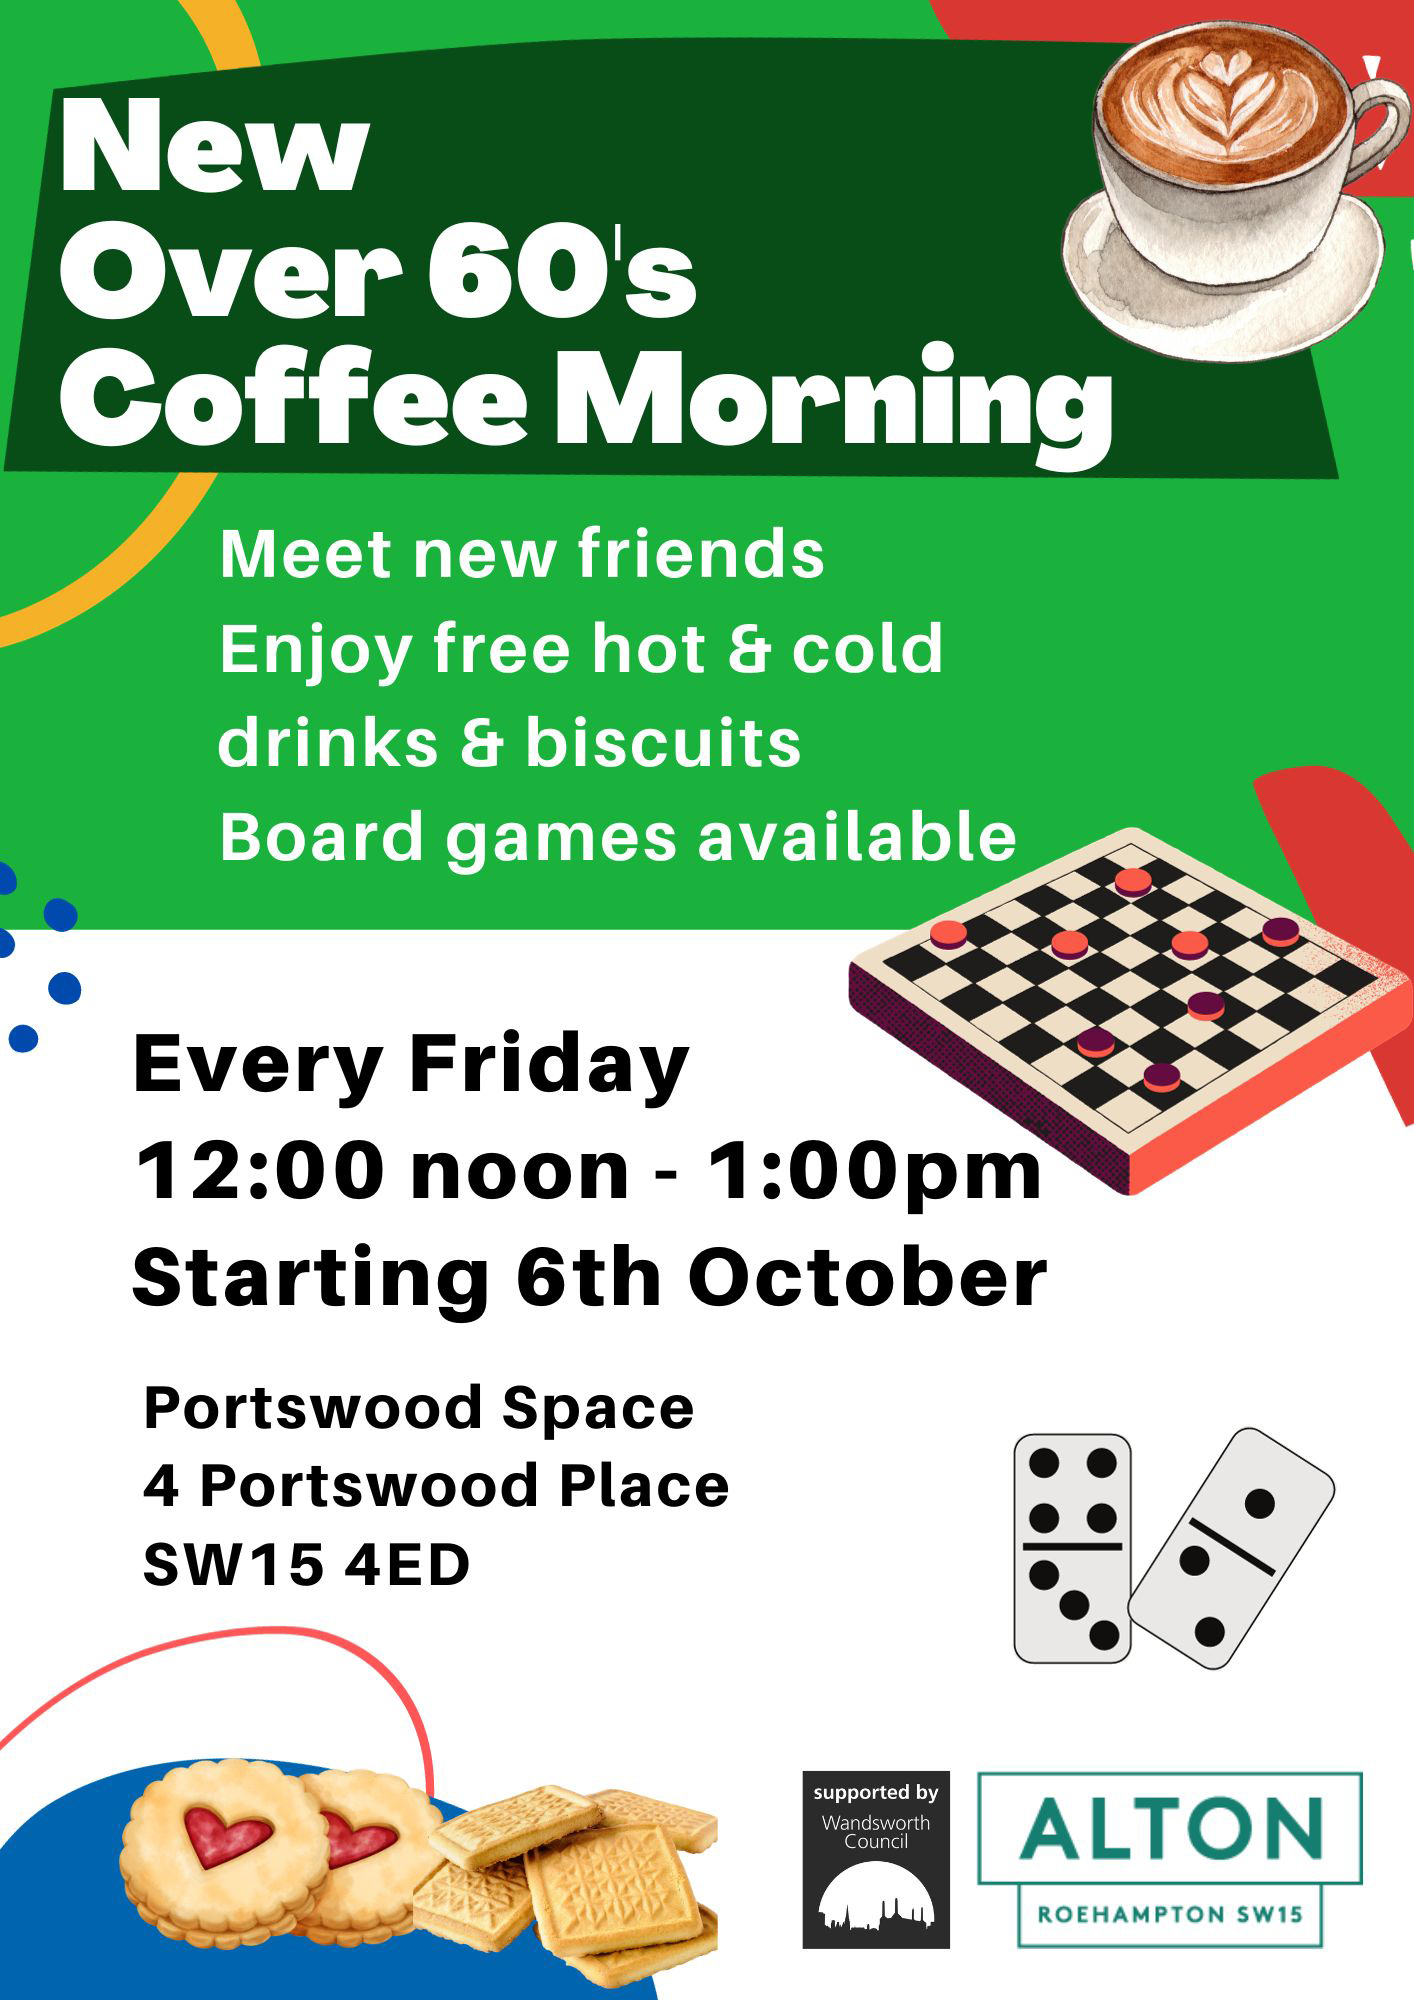 Poster advertising a new over 60's coffee morning, every Friday from 12 noon in Portswood Space, starting 6th October 2023